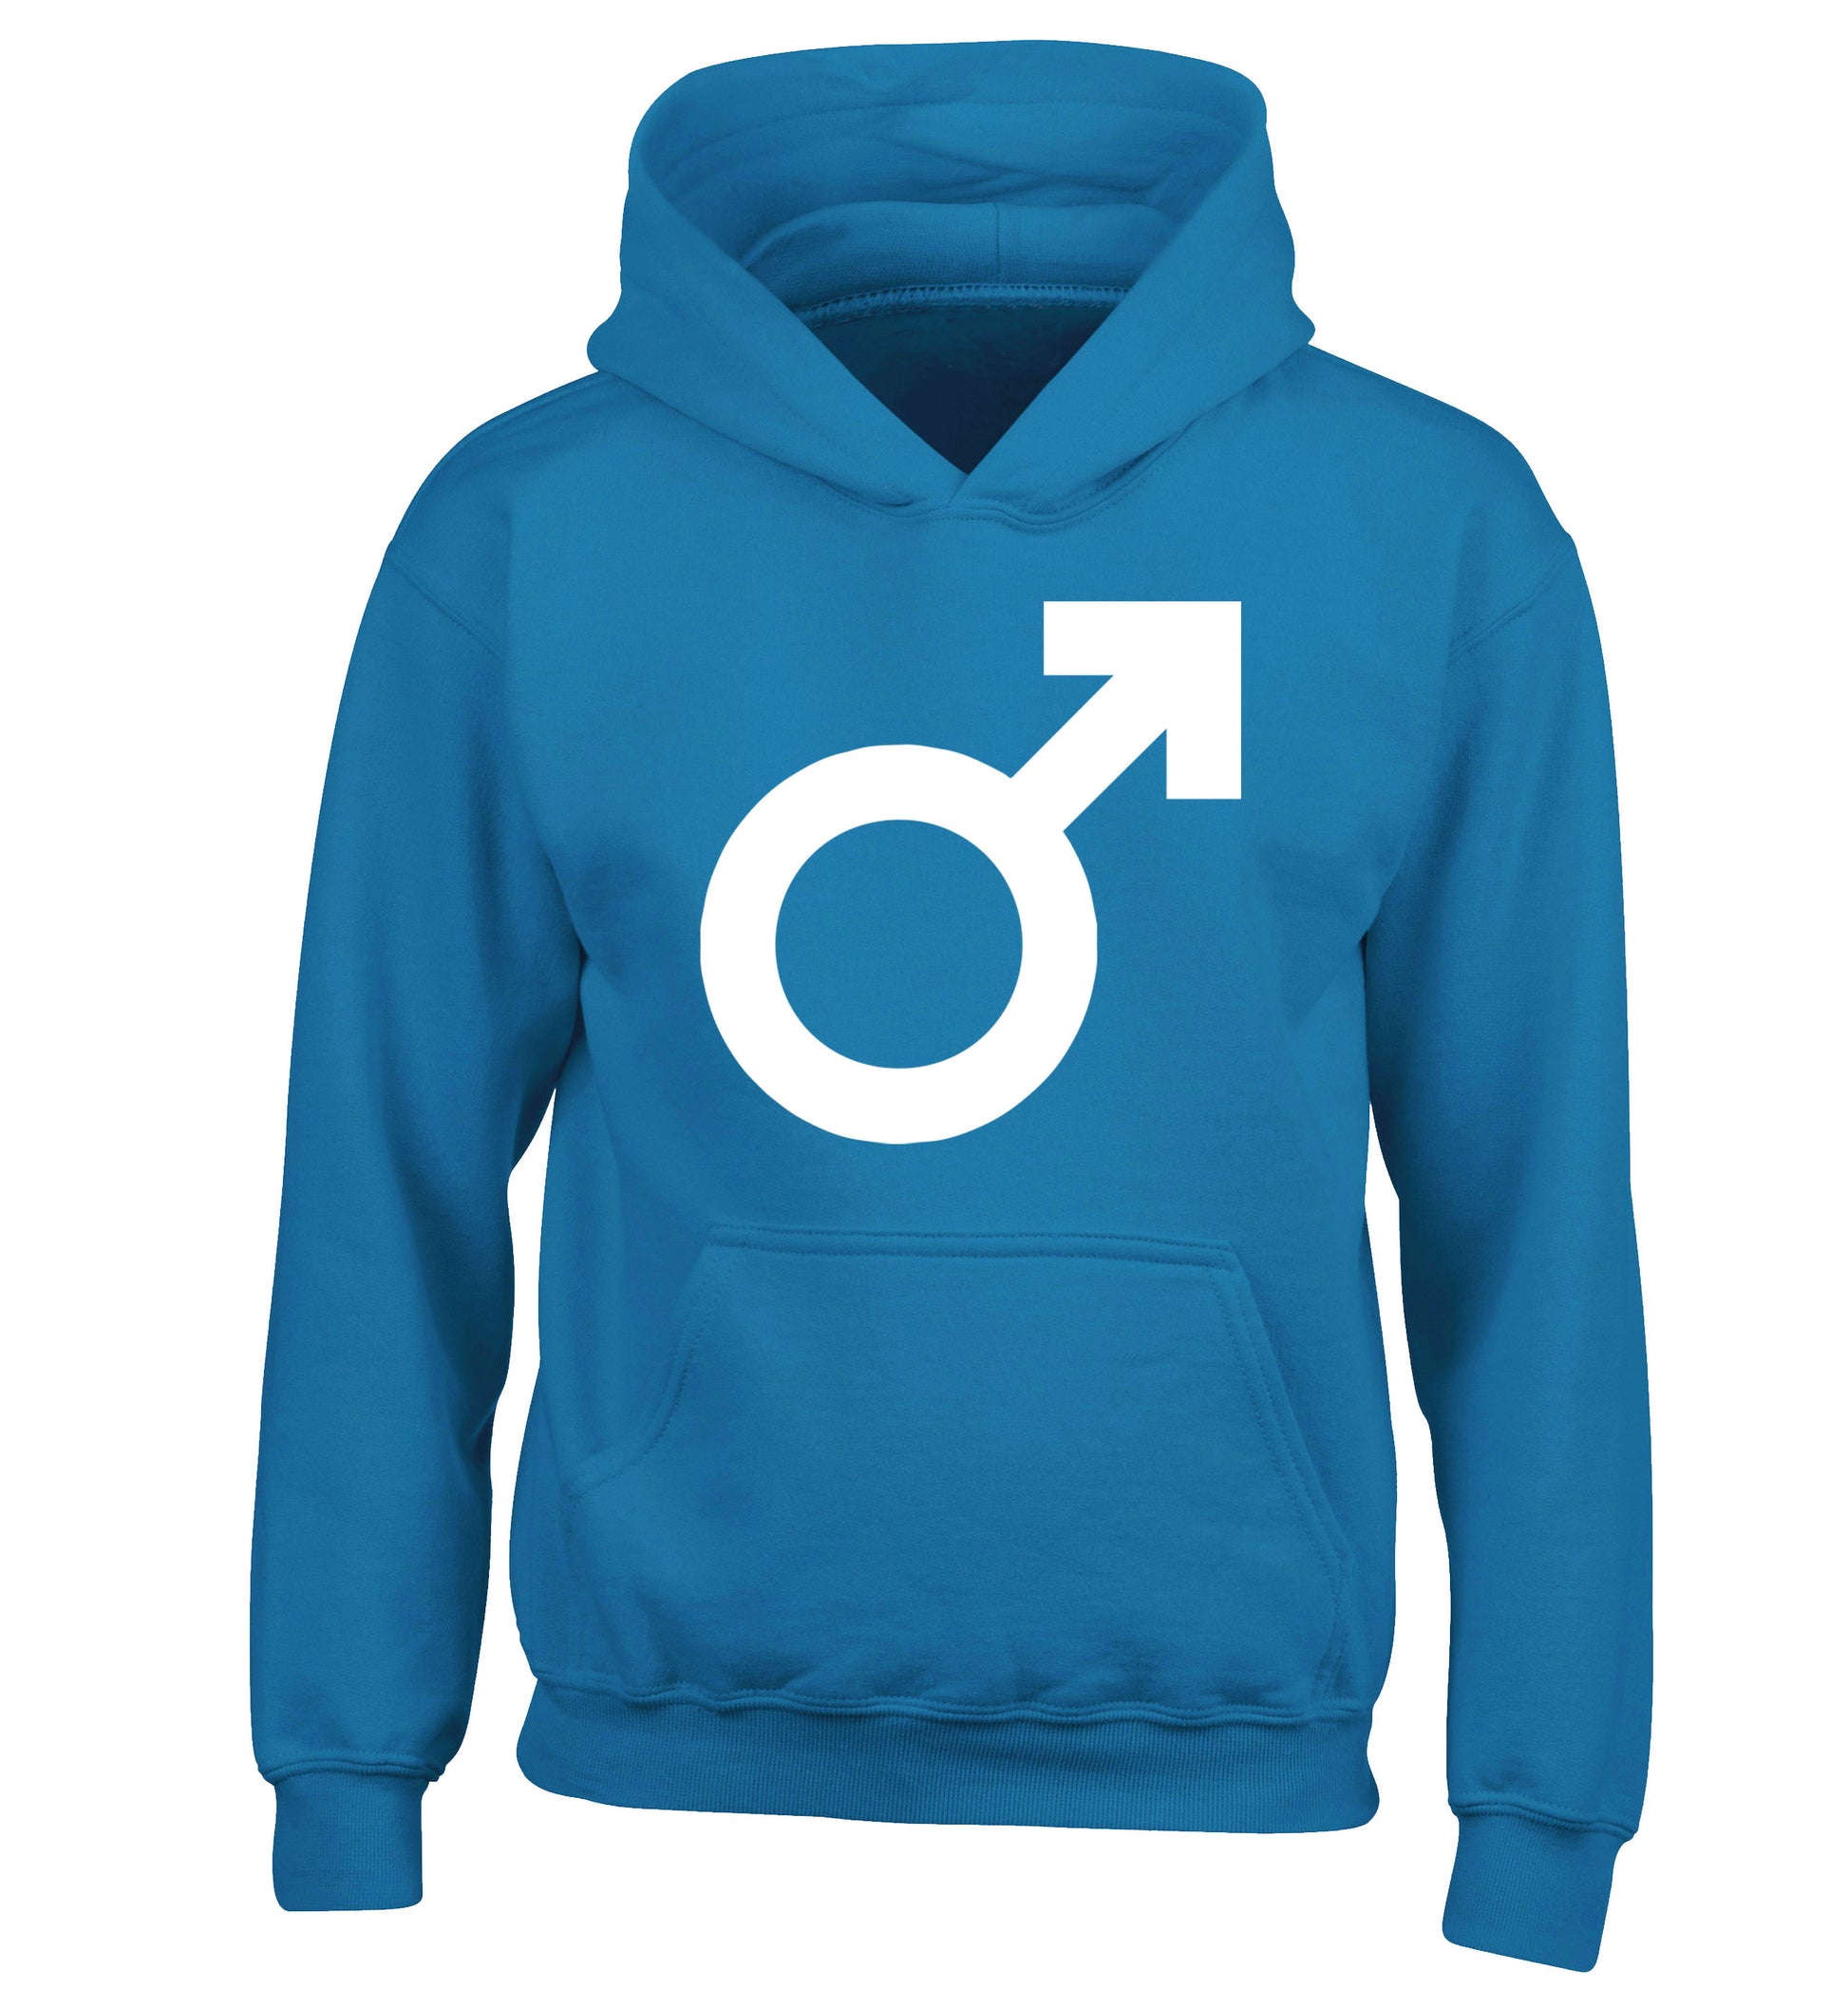 Male symbol large children's blue hoodie 12-14 Years